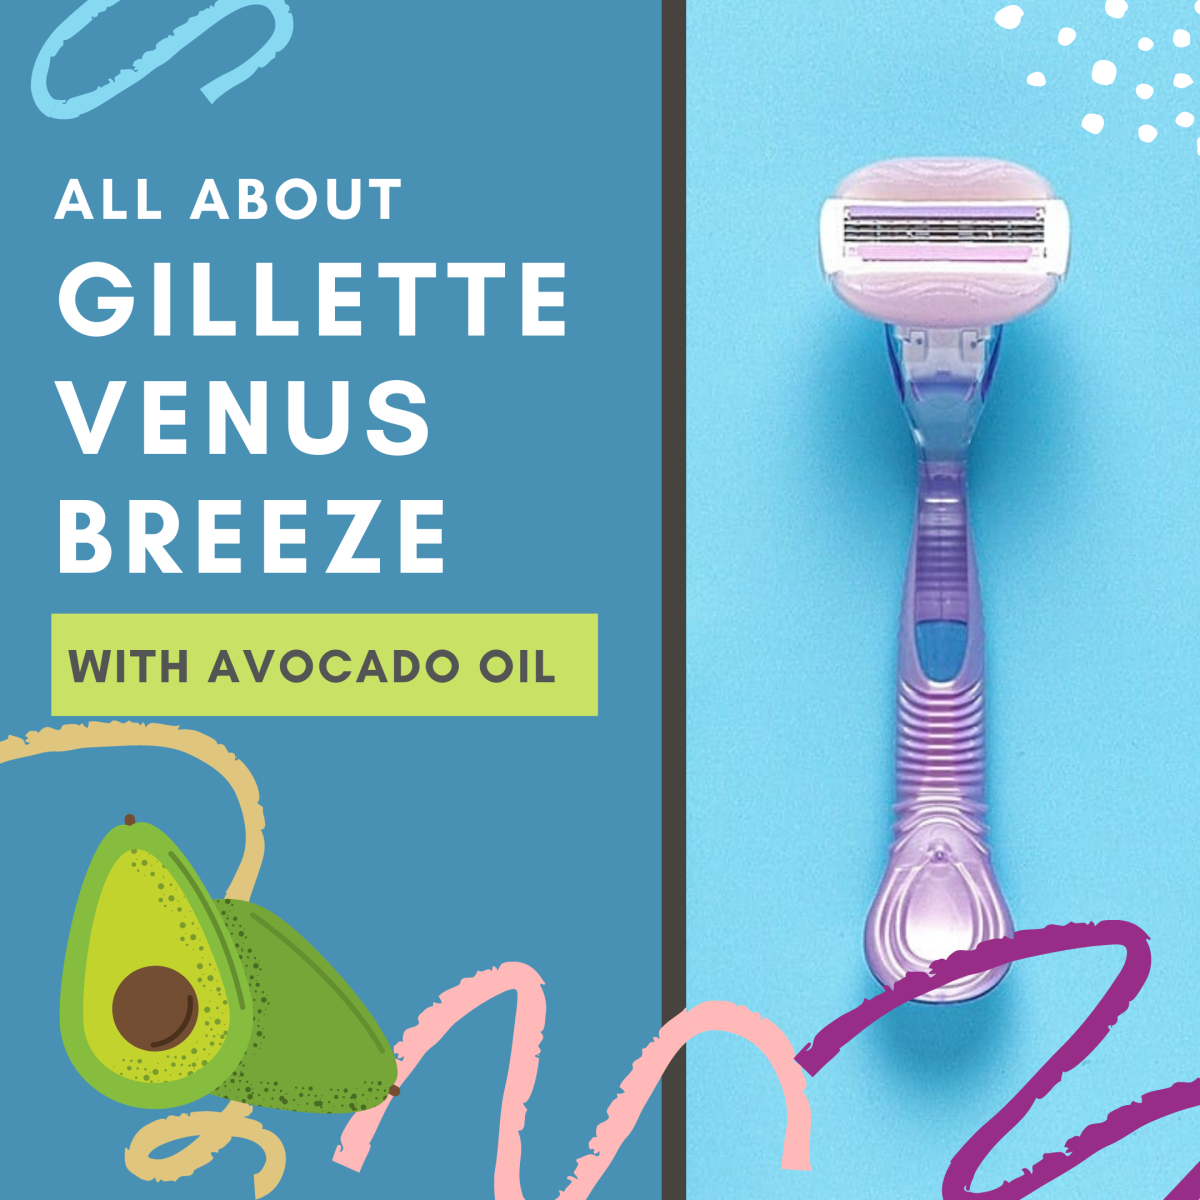 My Review of the Gillette Venus Breeze Razor With Avocado Oil